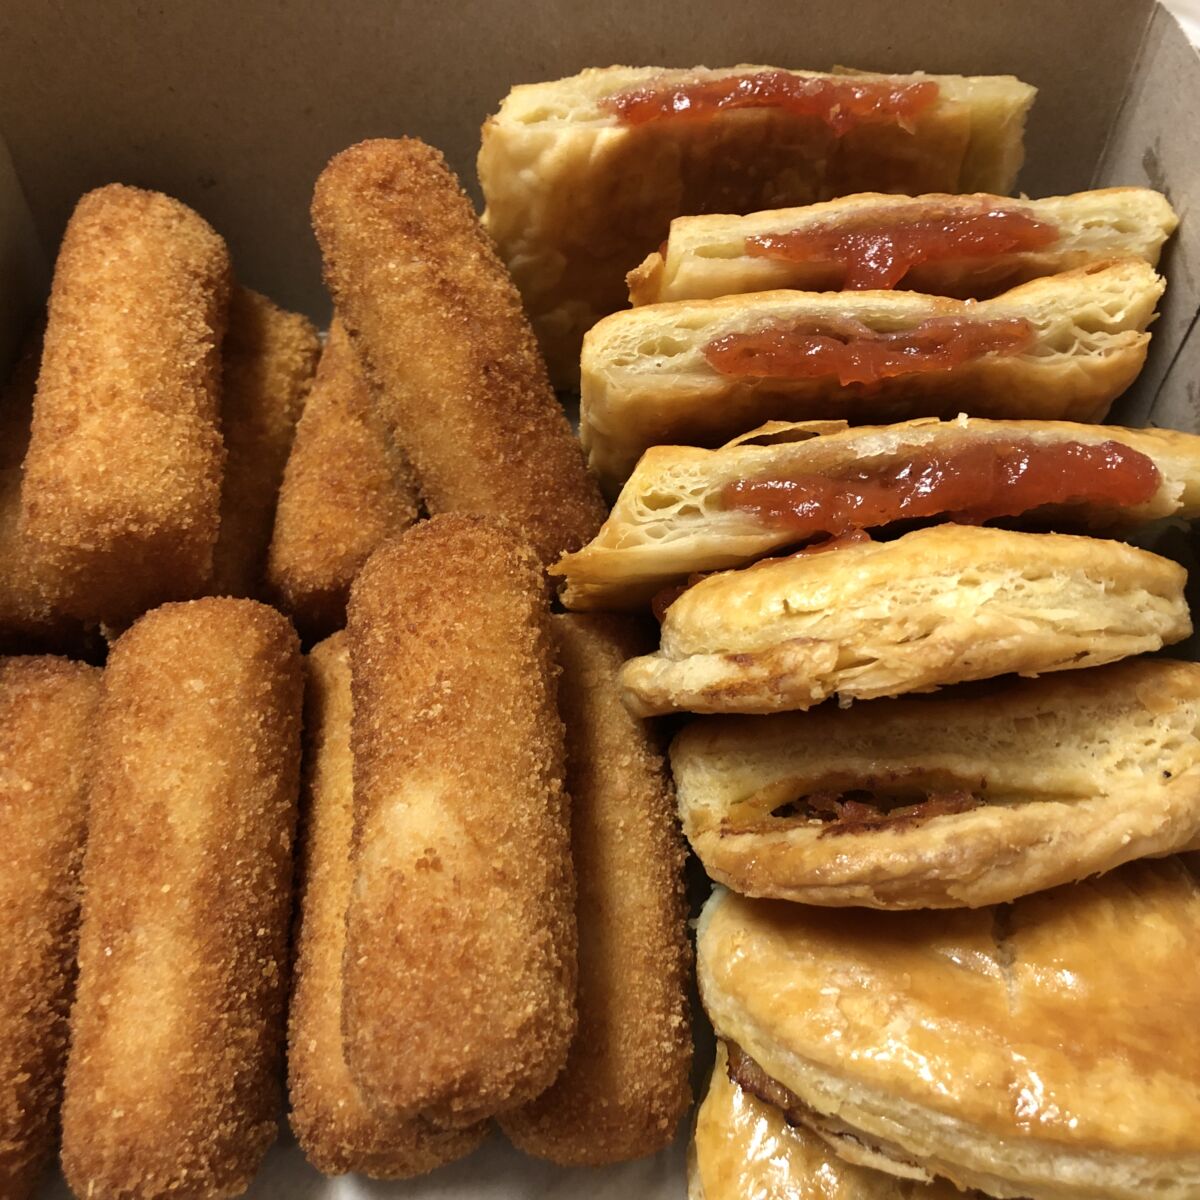 Box of Croquetas and Pastelitos from Party Cake Bakery